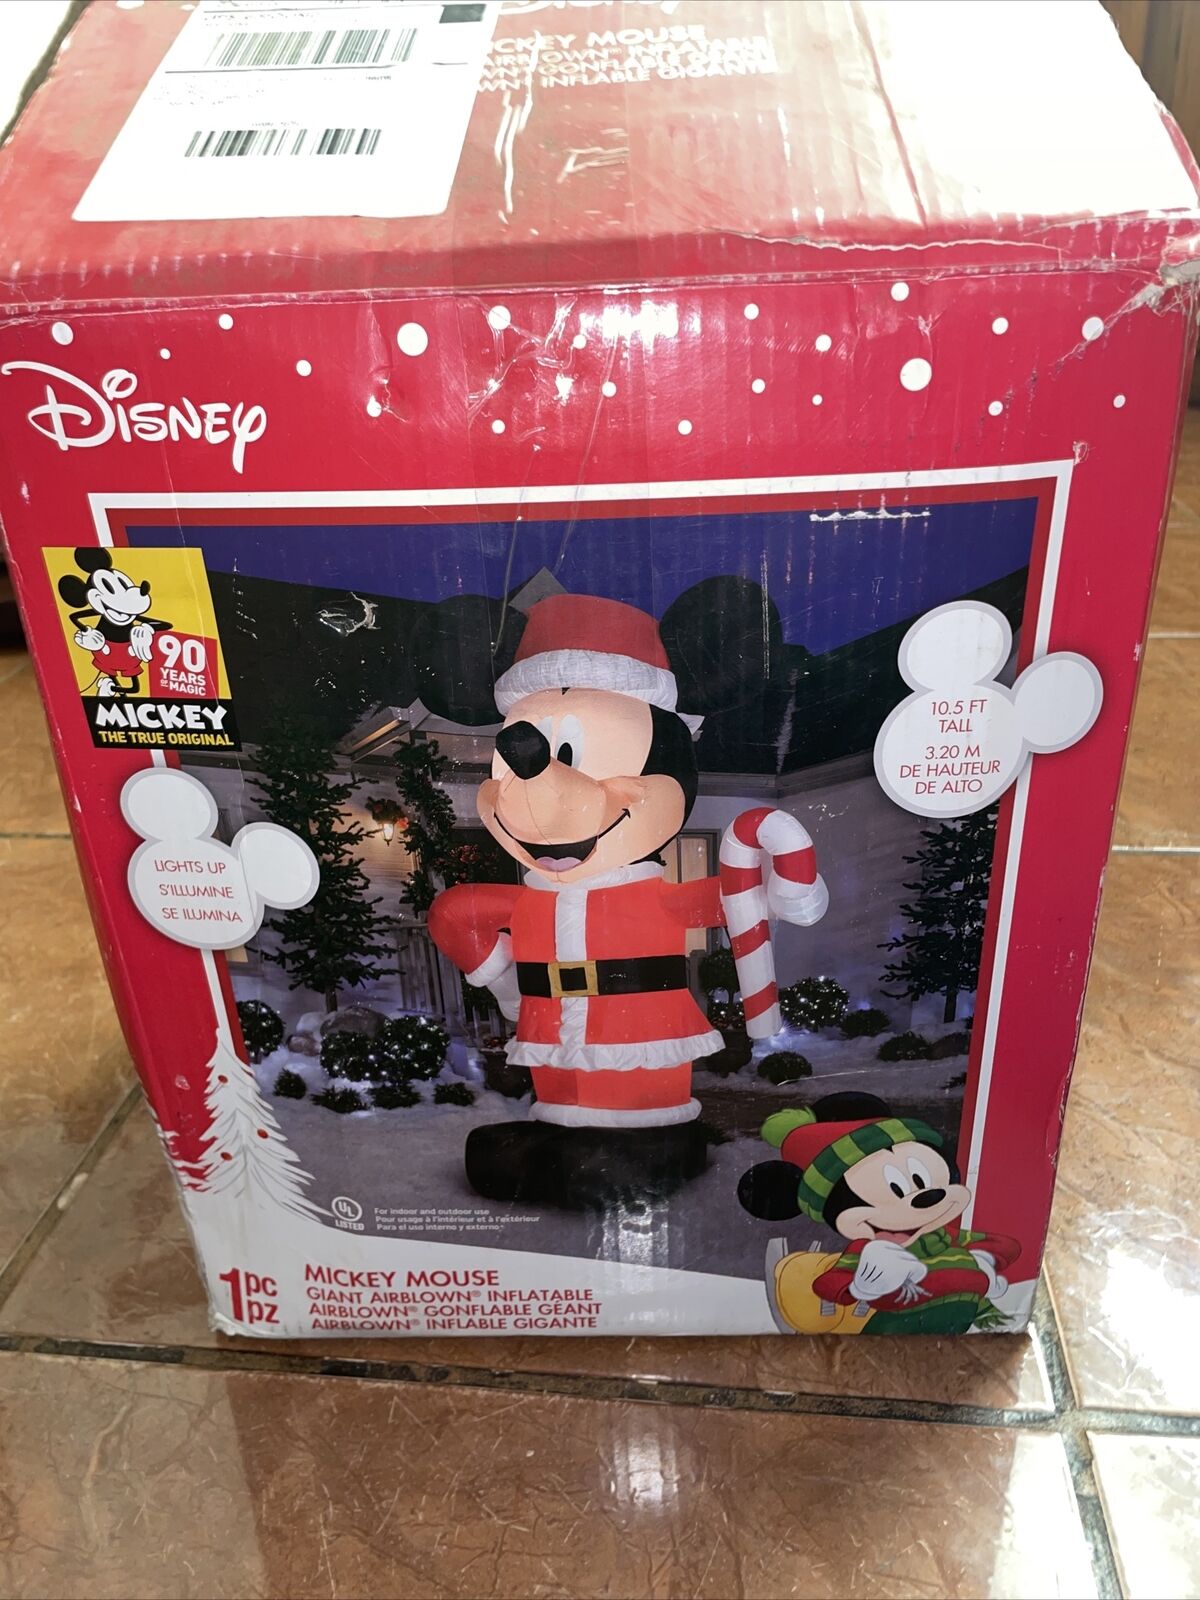 Gemmy 10.5' Airblown Inflatable Disney Mickey Mouse In Santa Suit (RARE)